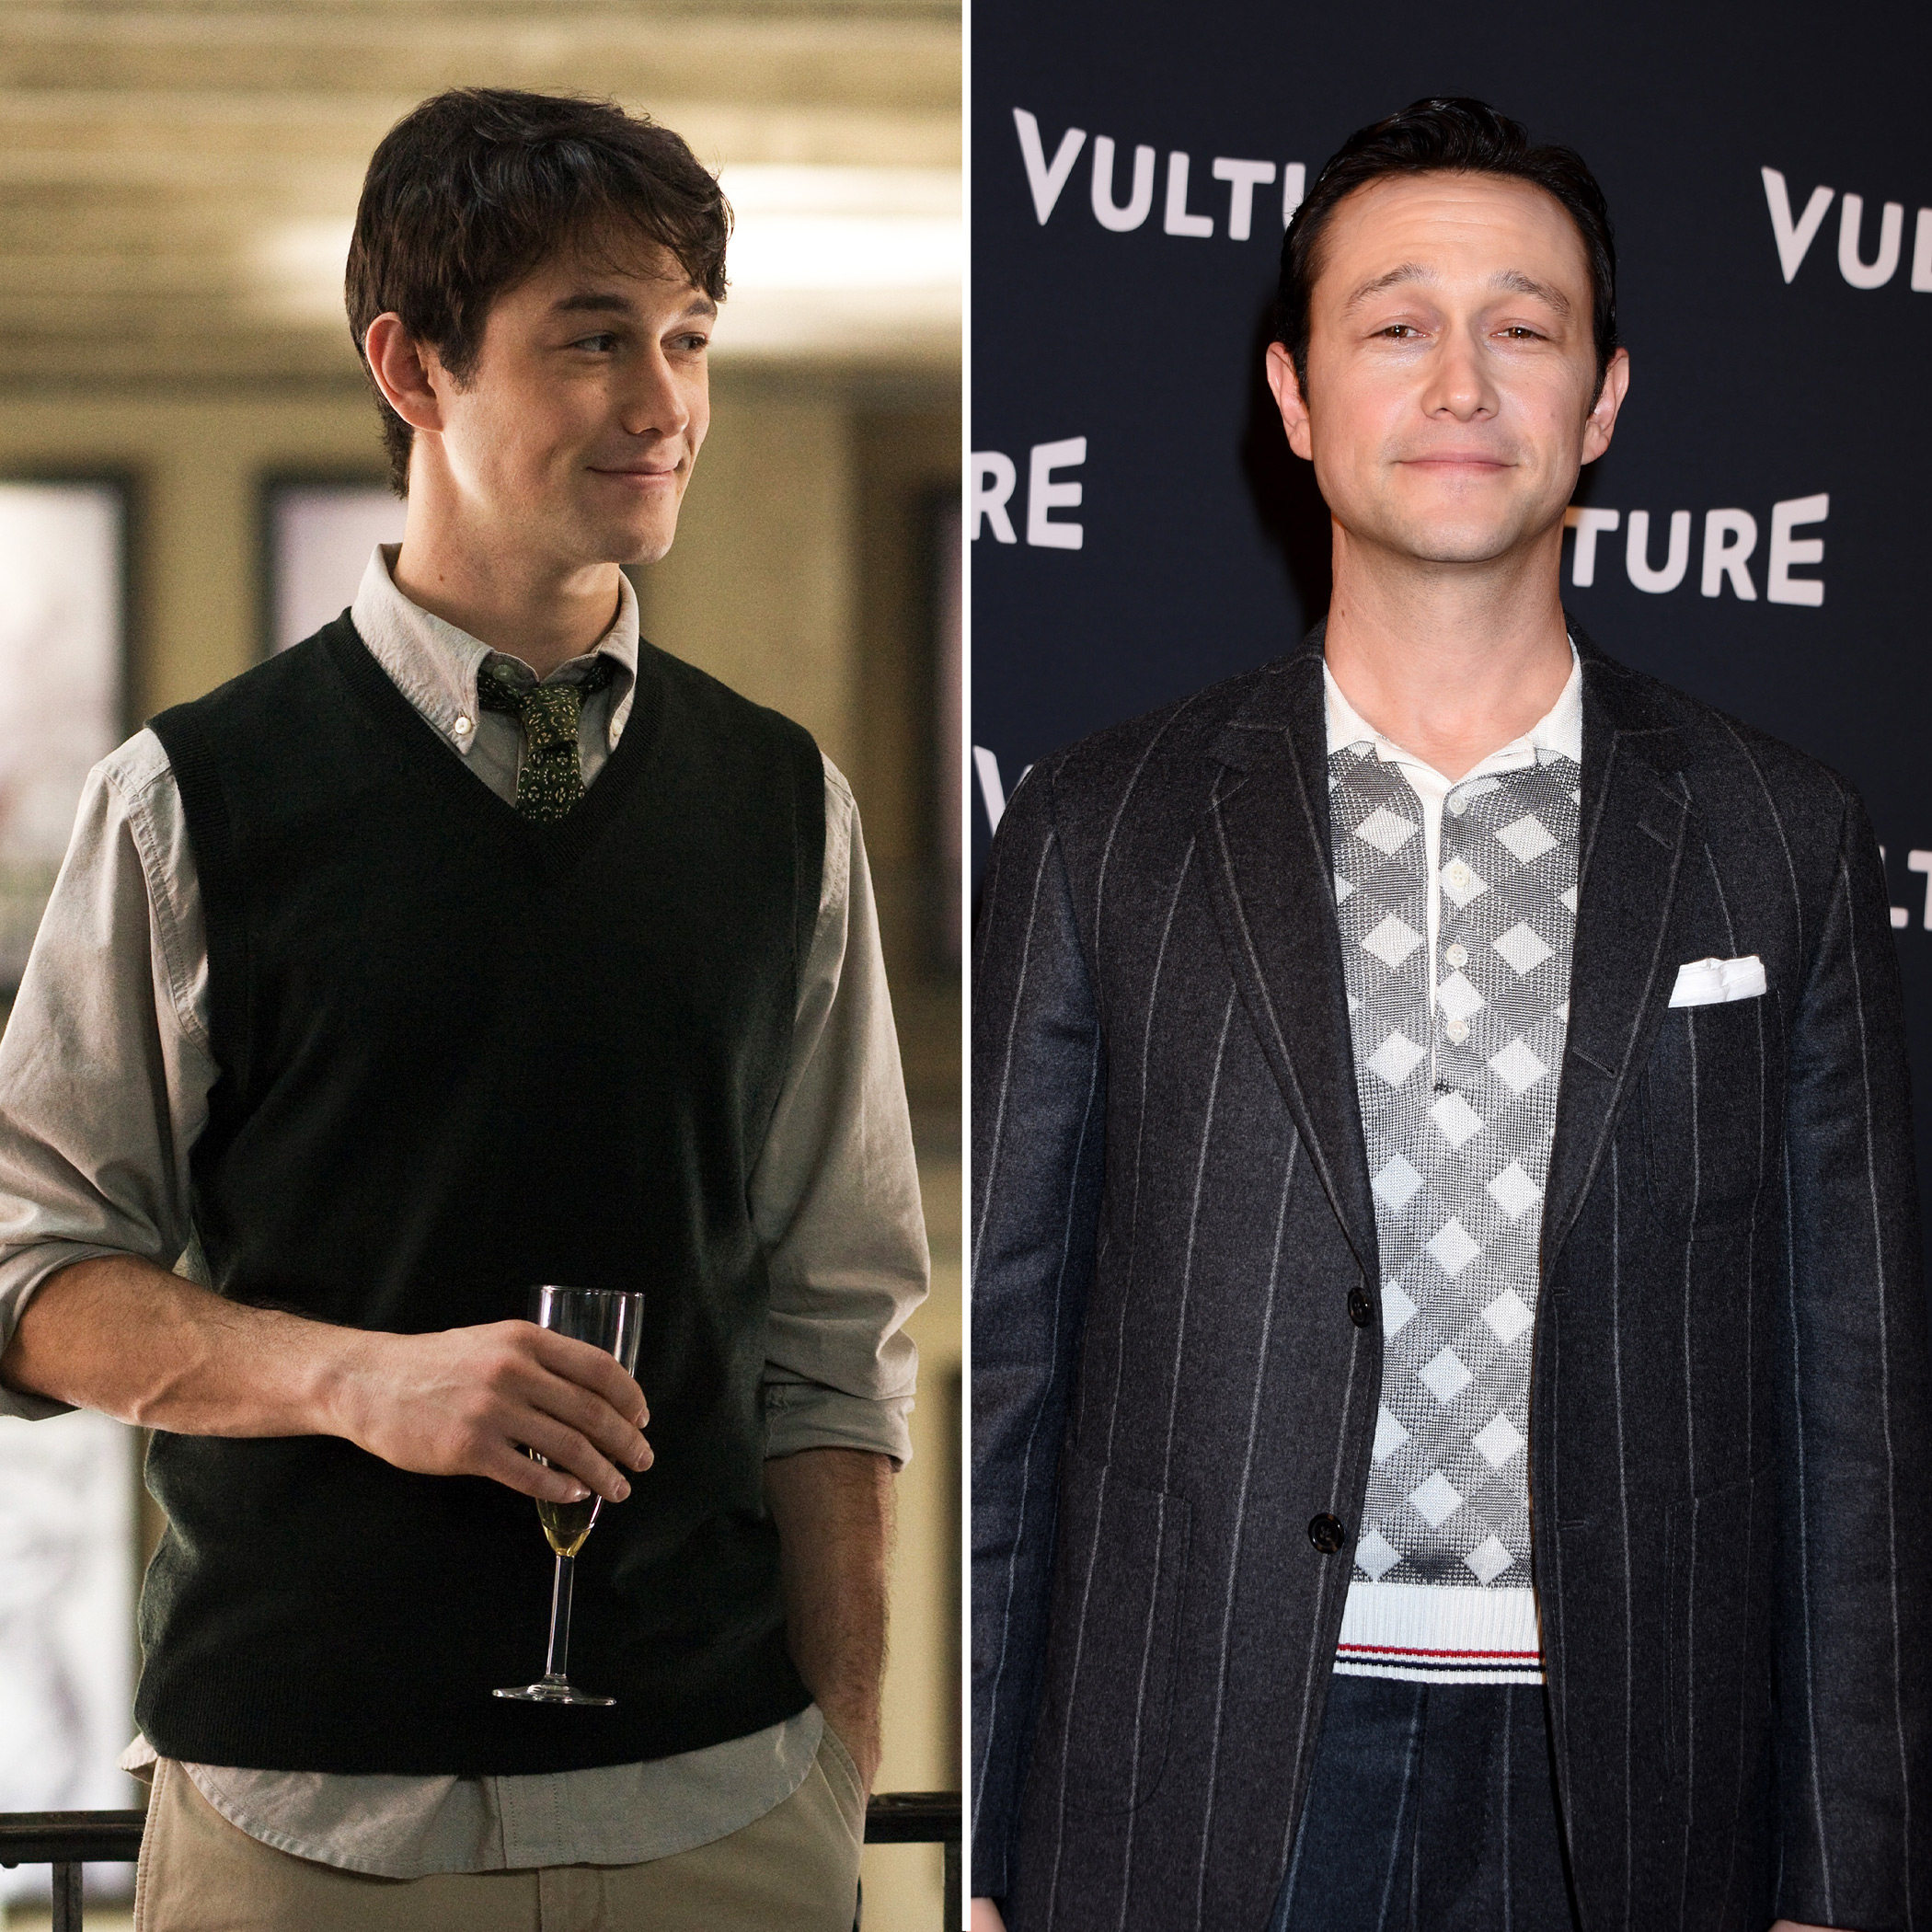 500 Days of Summer' Cast: Where Are They Now?